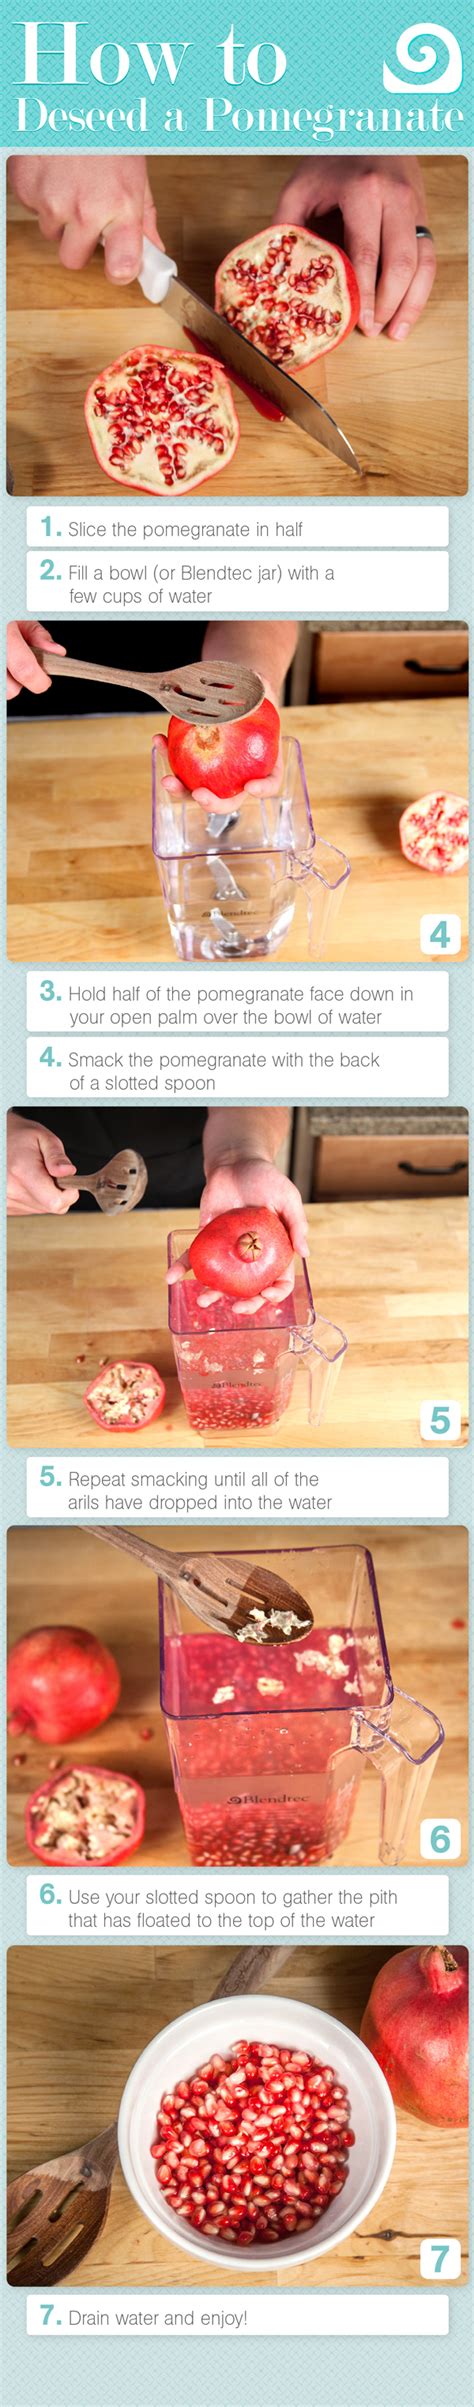 Because of this distinction, you may safely eat it even after the best before date date has lapsed. How to Deseed a Pomegranate | Blendtec Blog